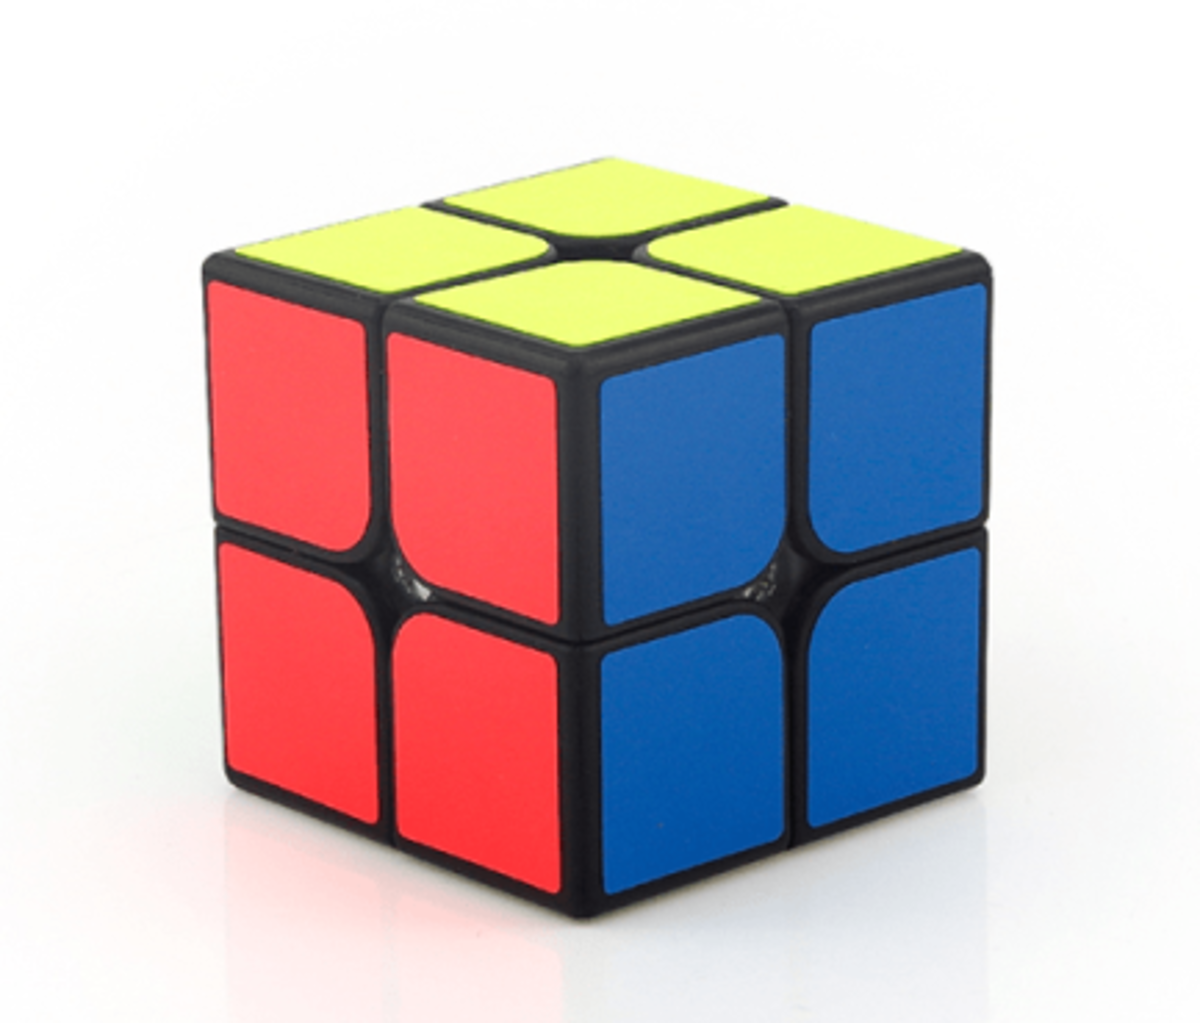 How to Solve a 2x2x2 Rubik's Cube Easily